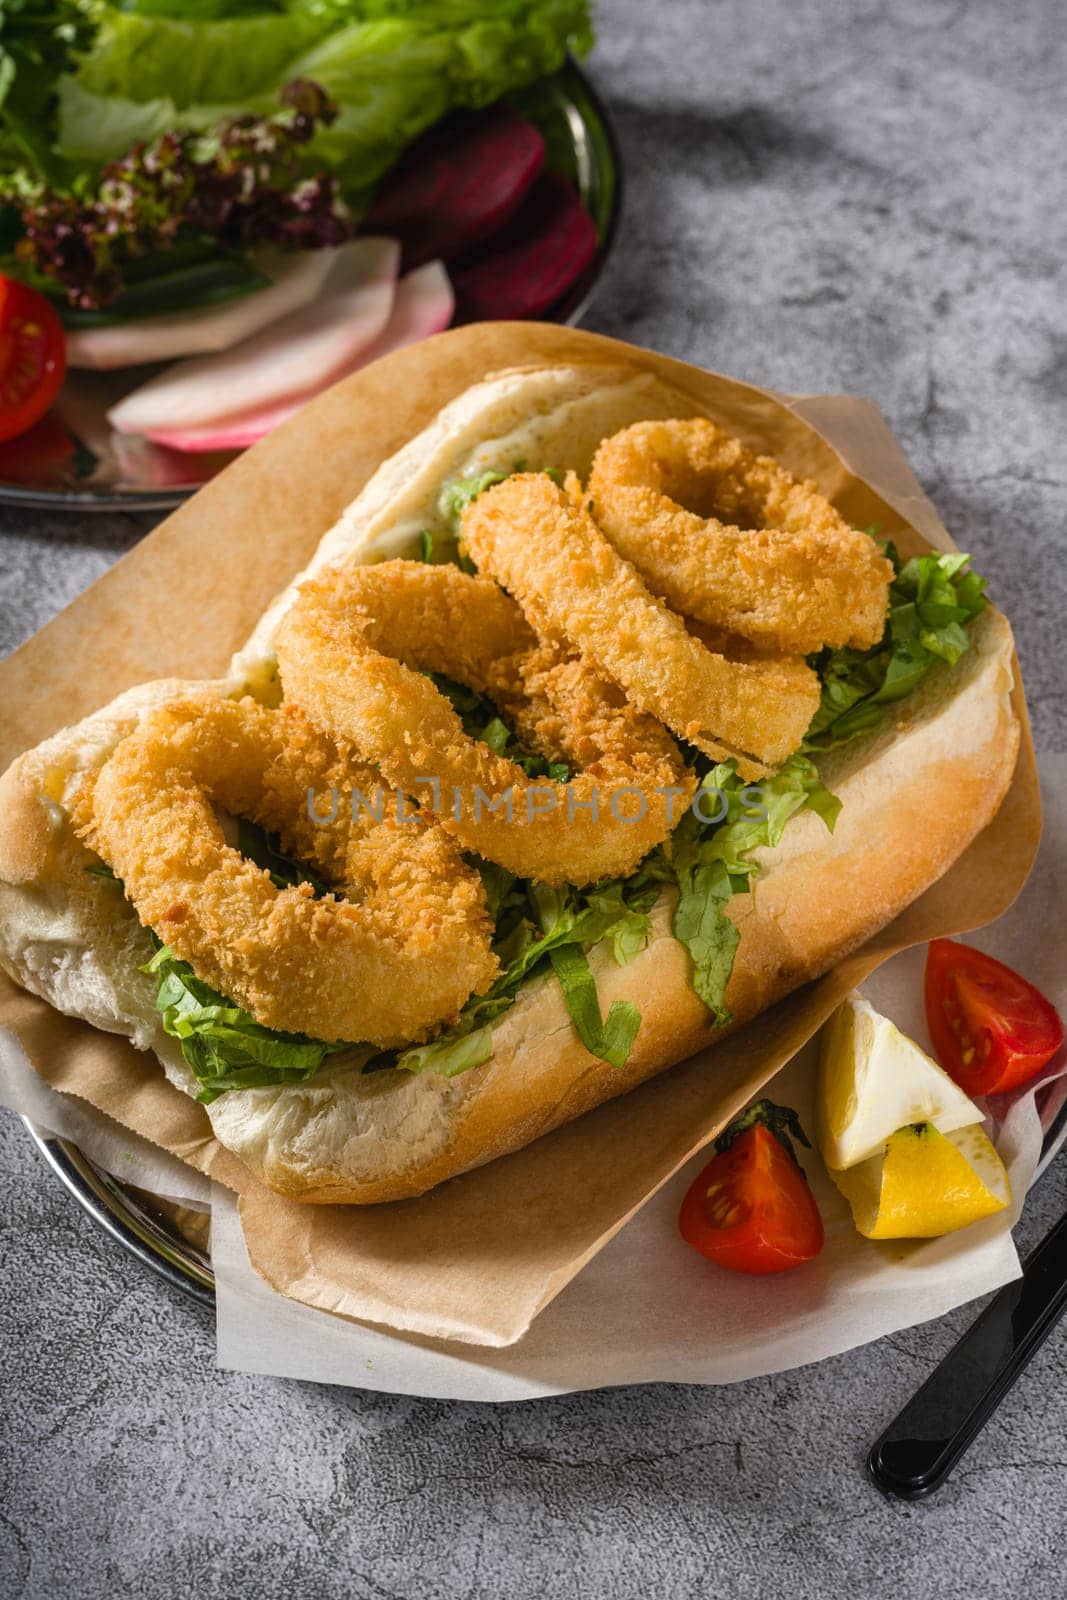 Deep fried squid in bread with greens on the side. Squid sandwich by Sonat